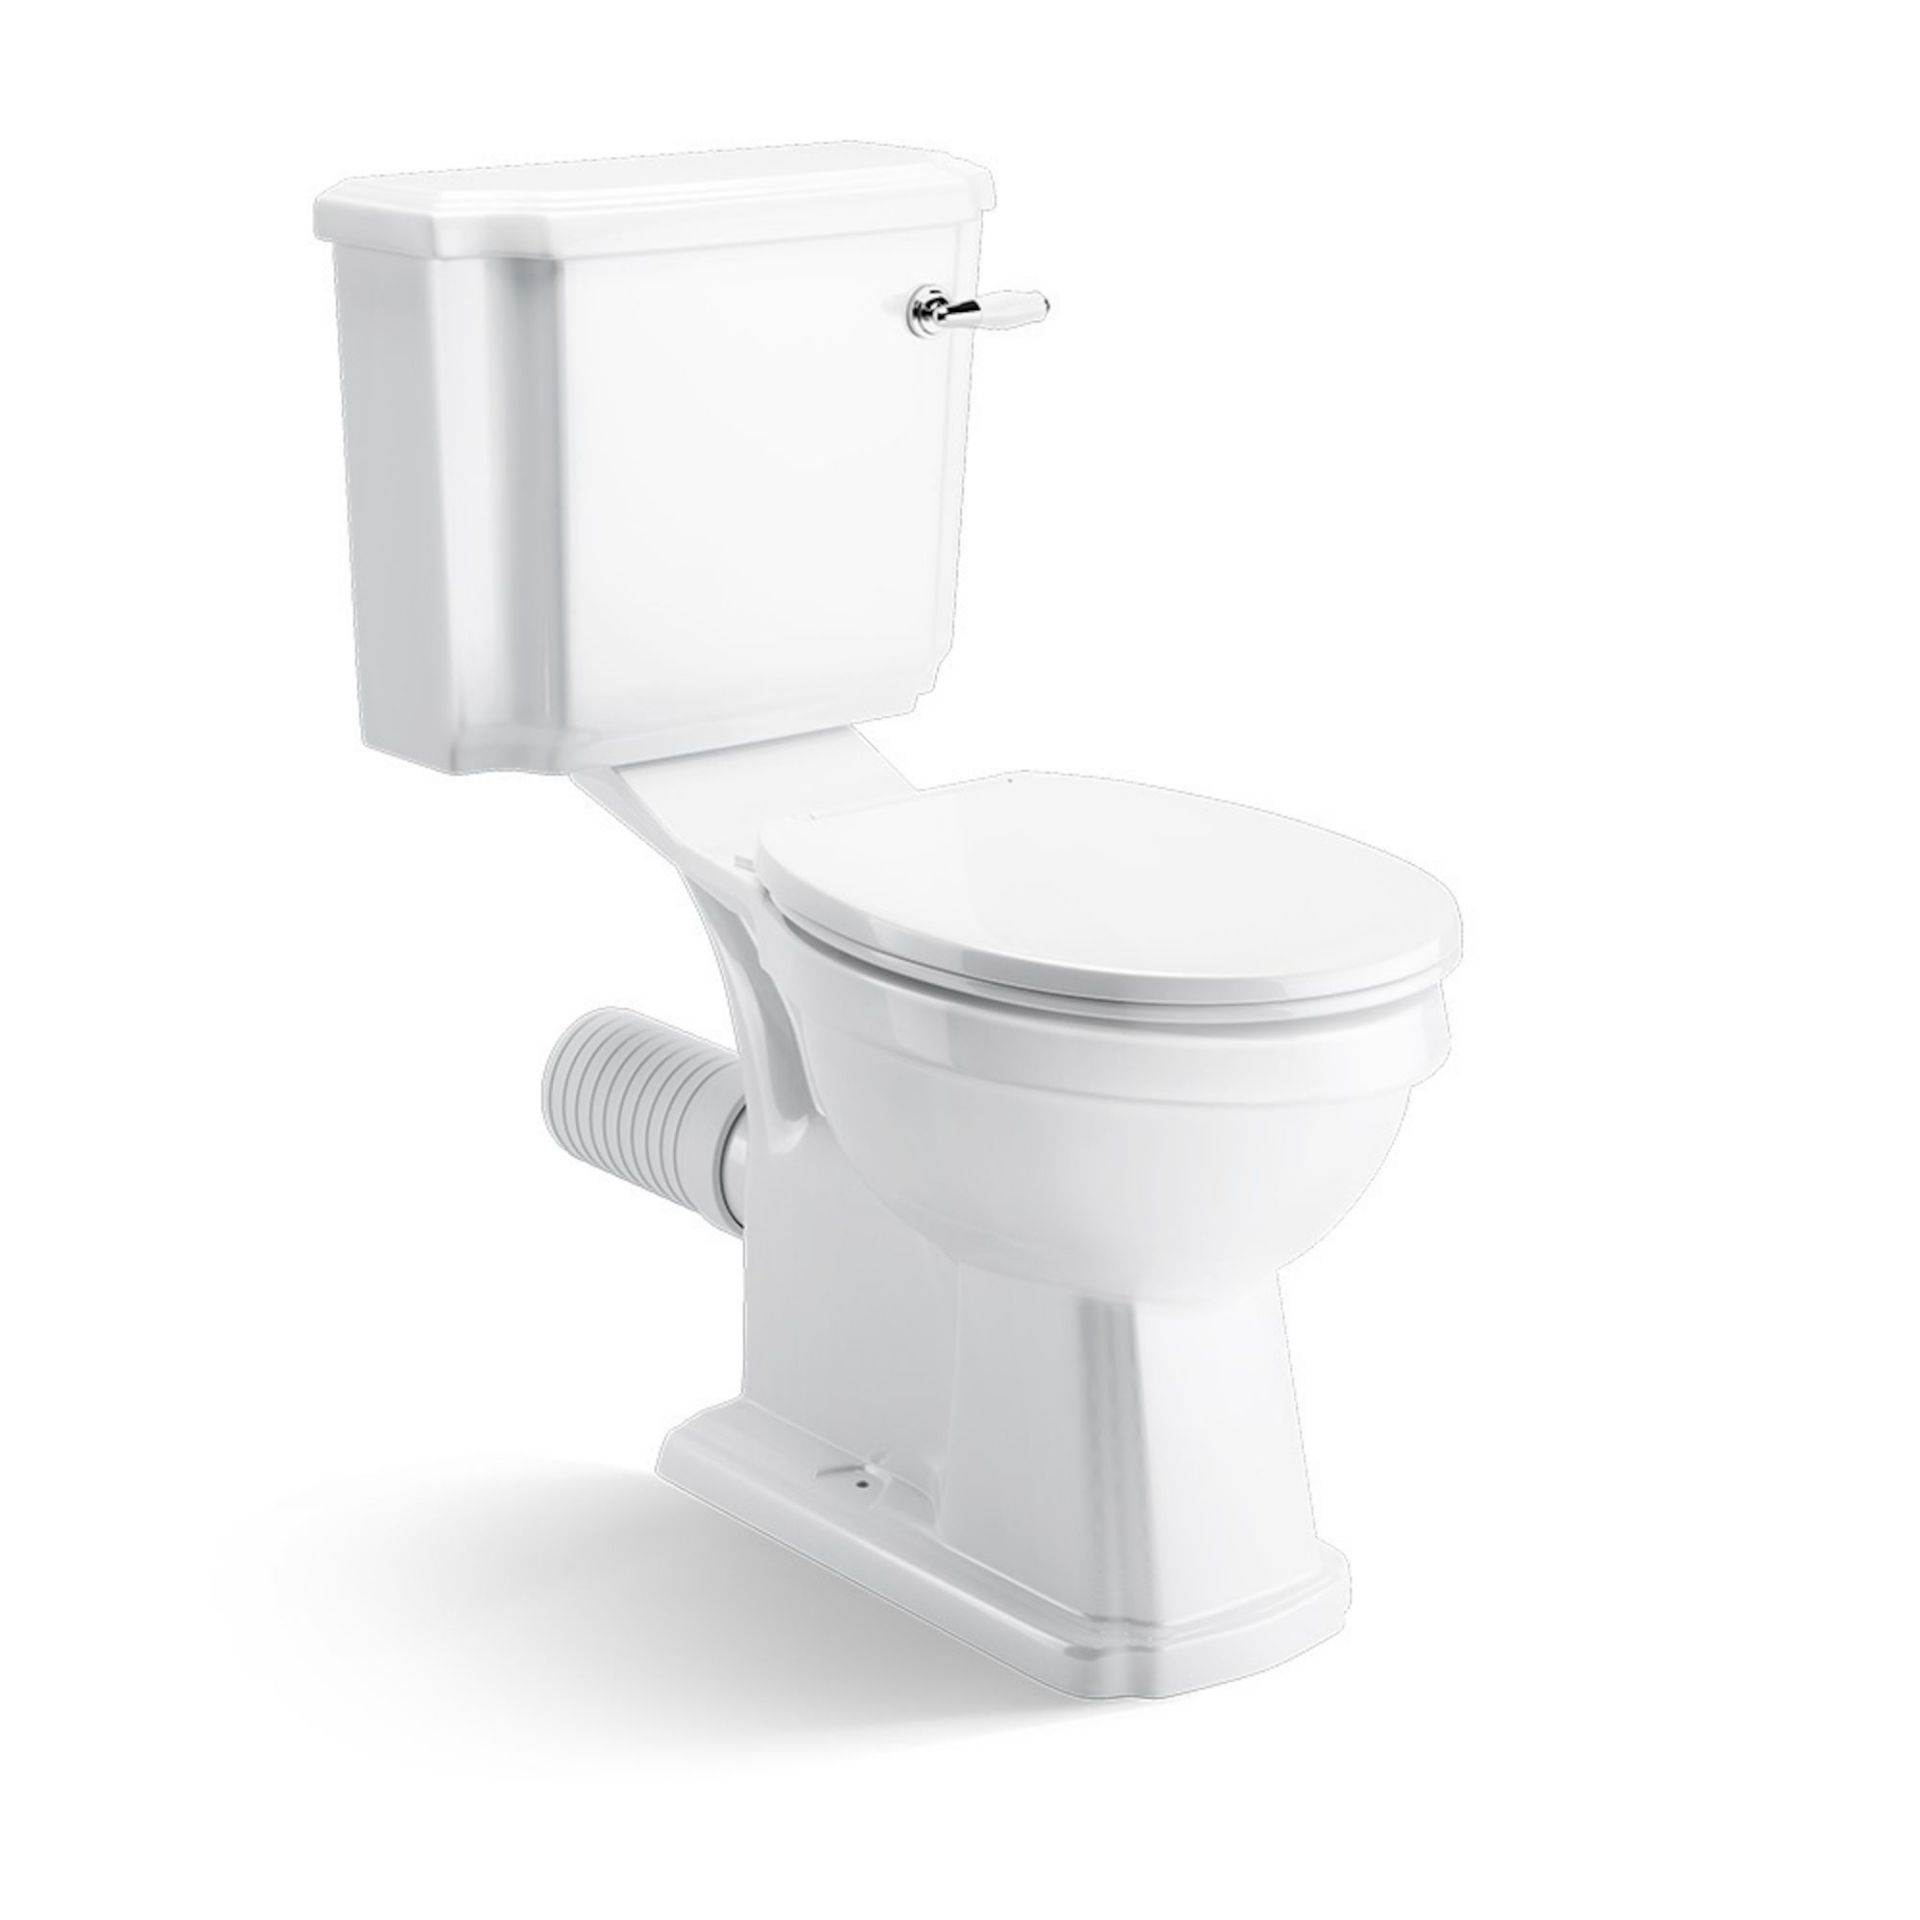 New & Boxed Cambridge Traditional Close Coupled Toilet & Cistern - White Seat. Traditional Fea...